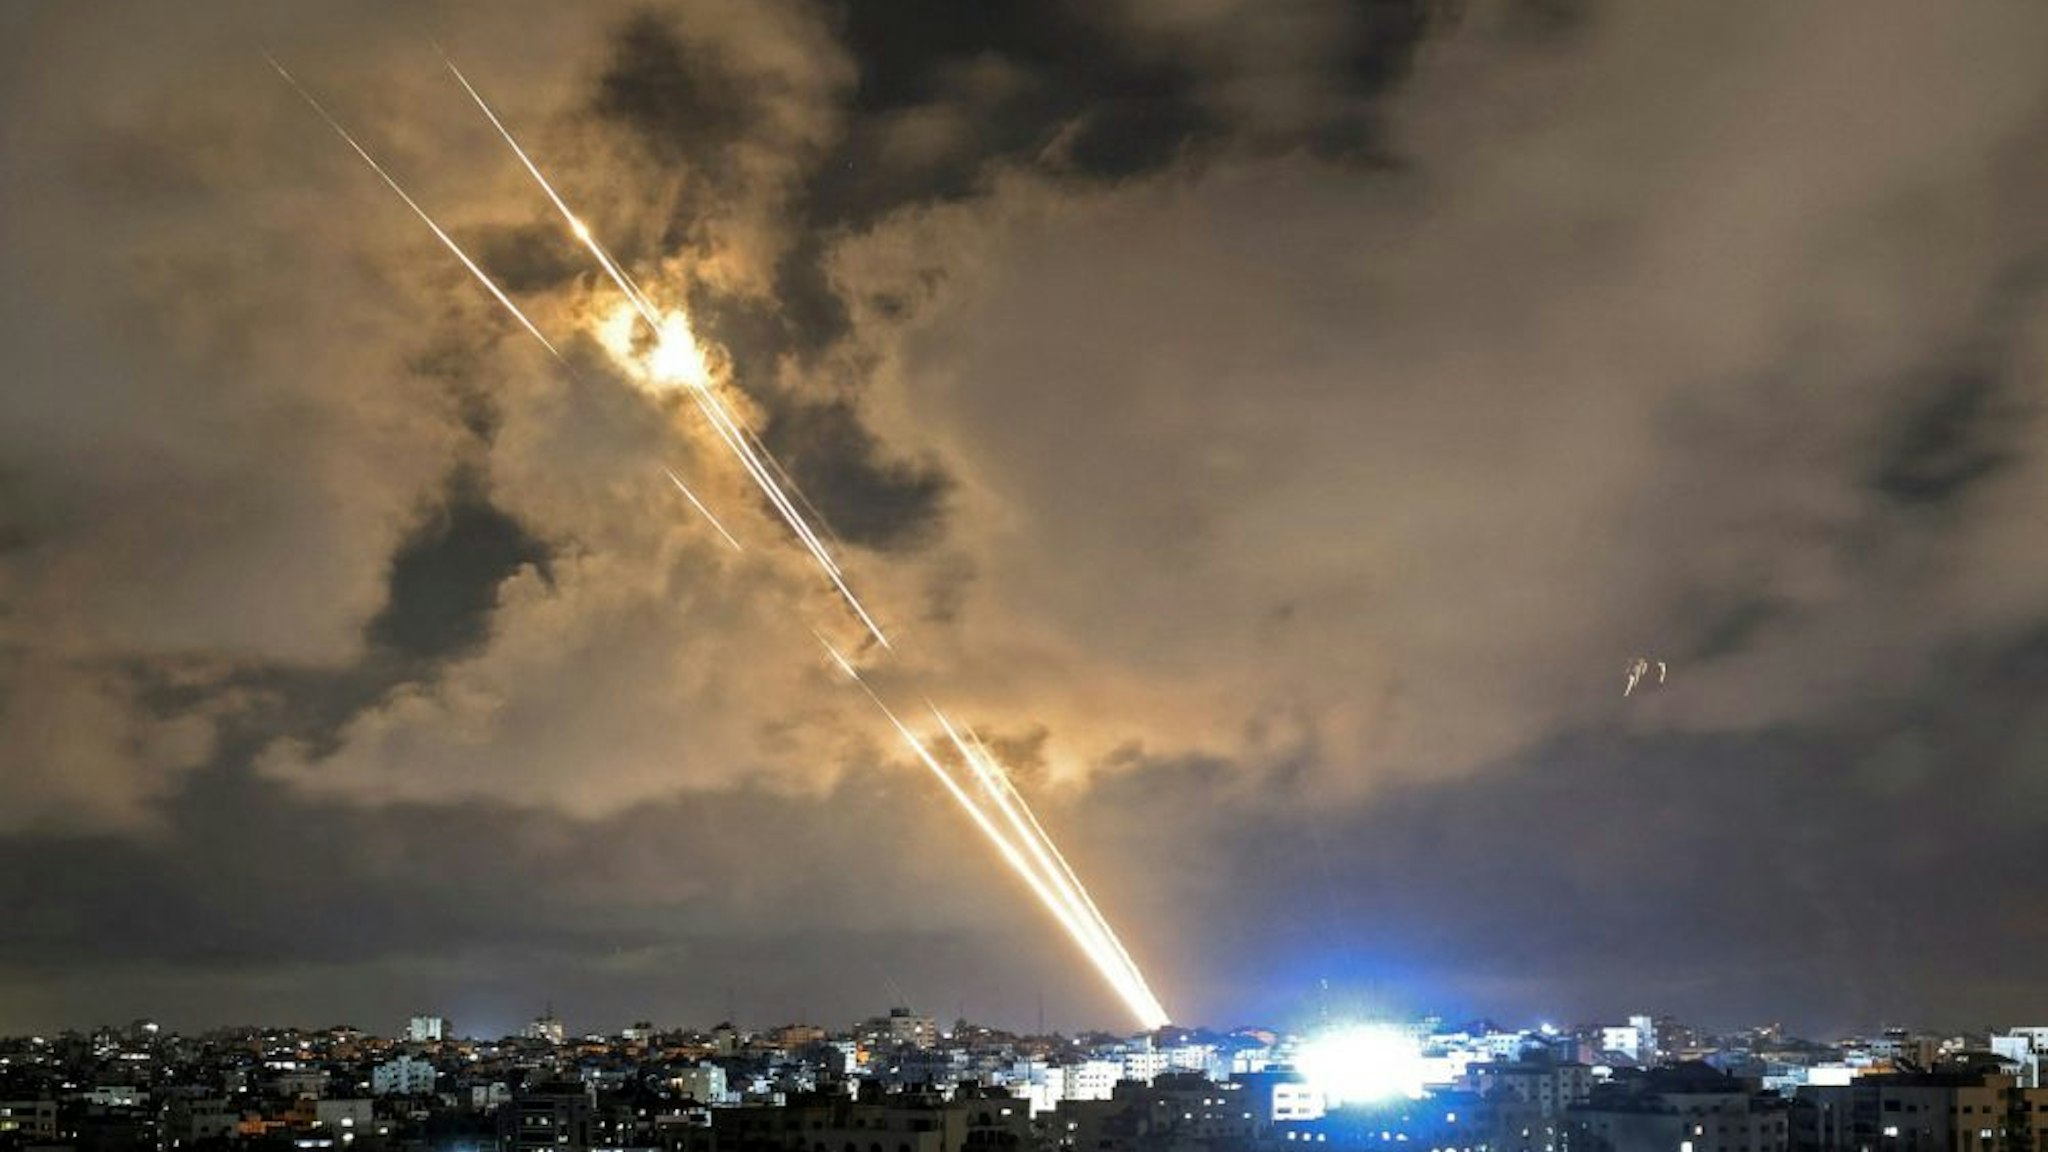 TOPSHOT - Rockets are launched towards Israel from Gaza City, controlled by the Palestinian Hamas movement, on May 20, 2021 - Diplomatic efforts gathered pace for a ceasefire on the 11th day of deadly violence between Israel and armed Palestinian groups in Gaza, as air strikes again hammered the enclave.